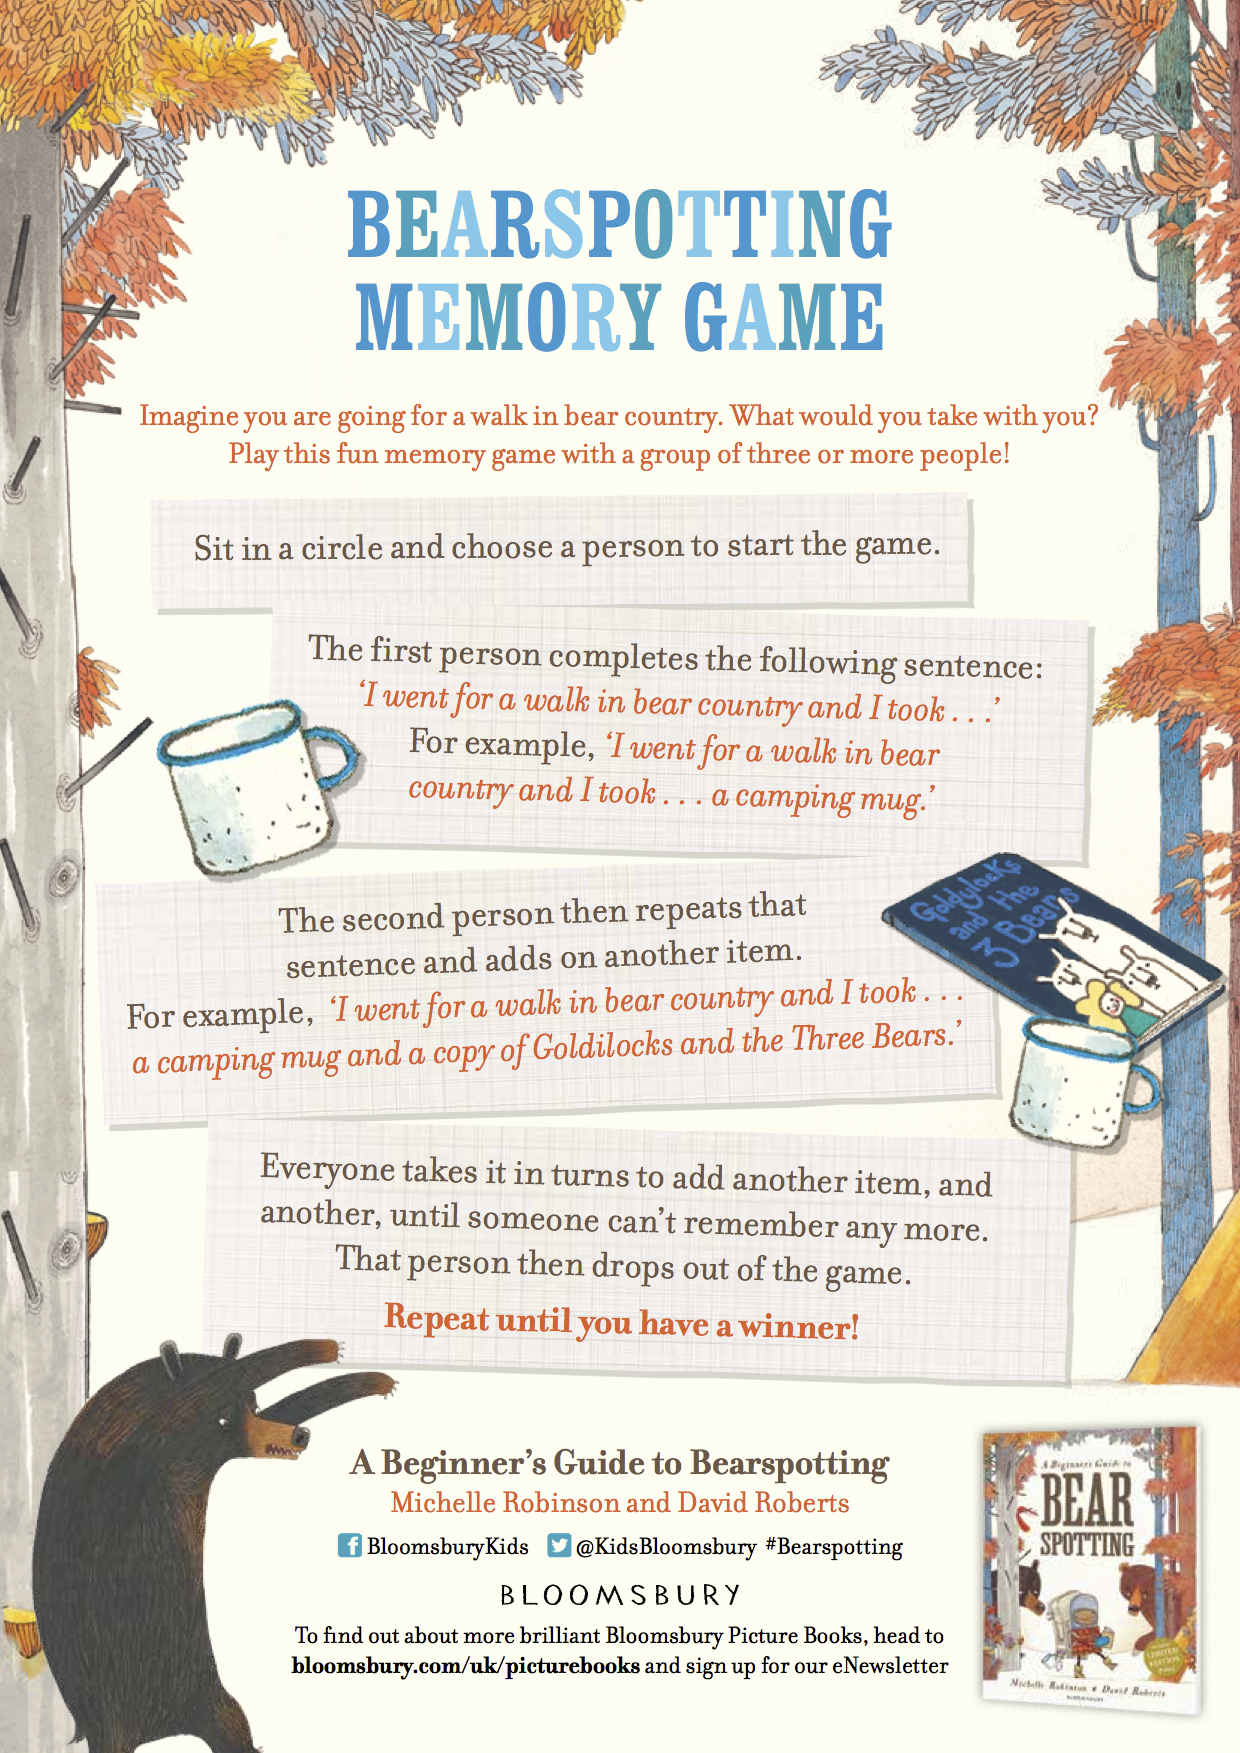 Memory game activity sheet for A Beginner's Guide to Bear Spotting